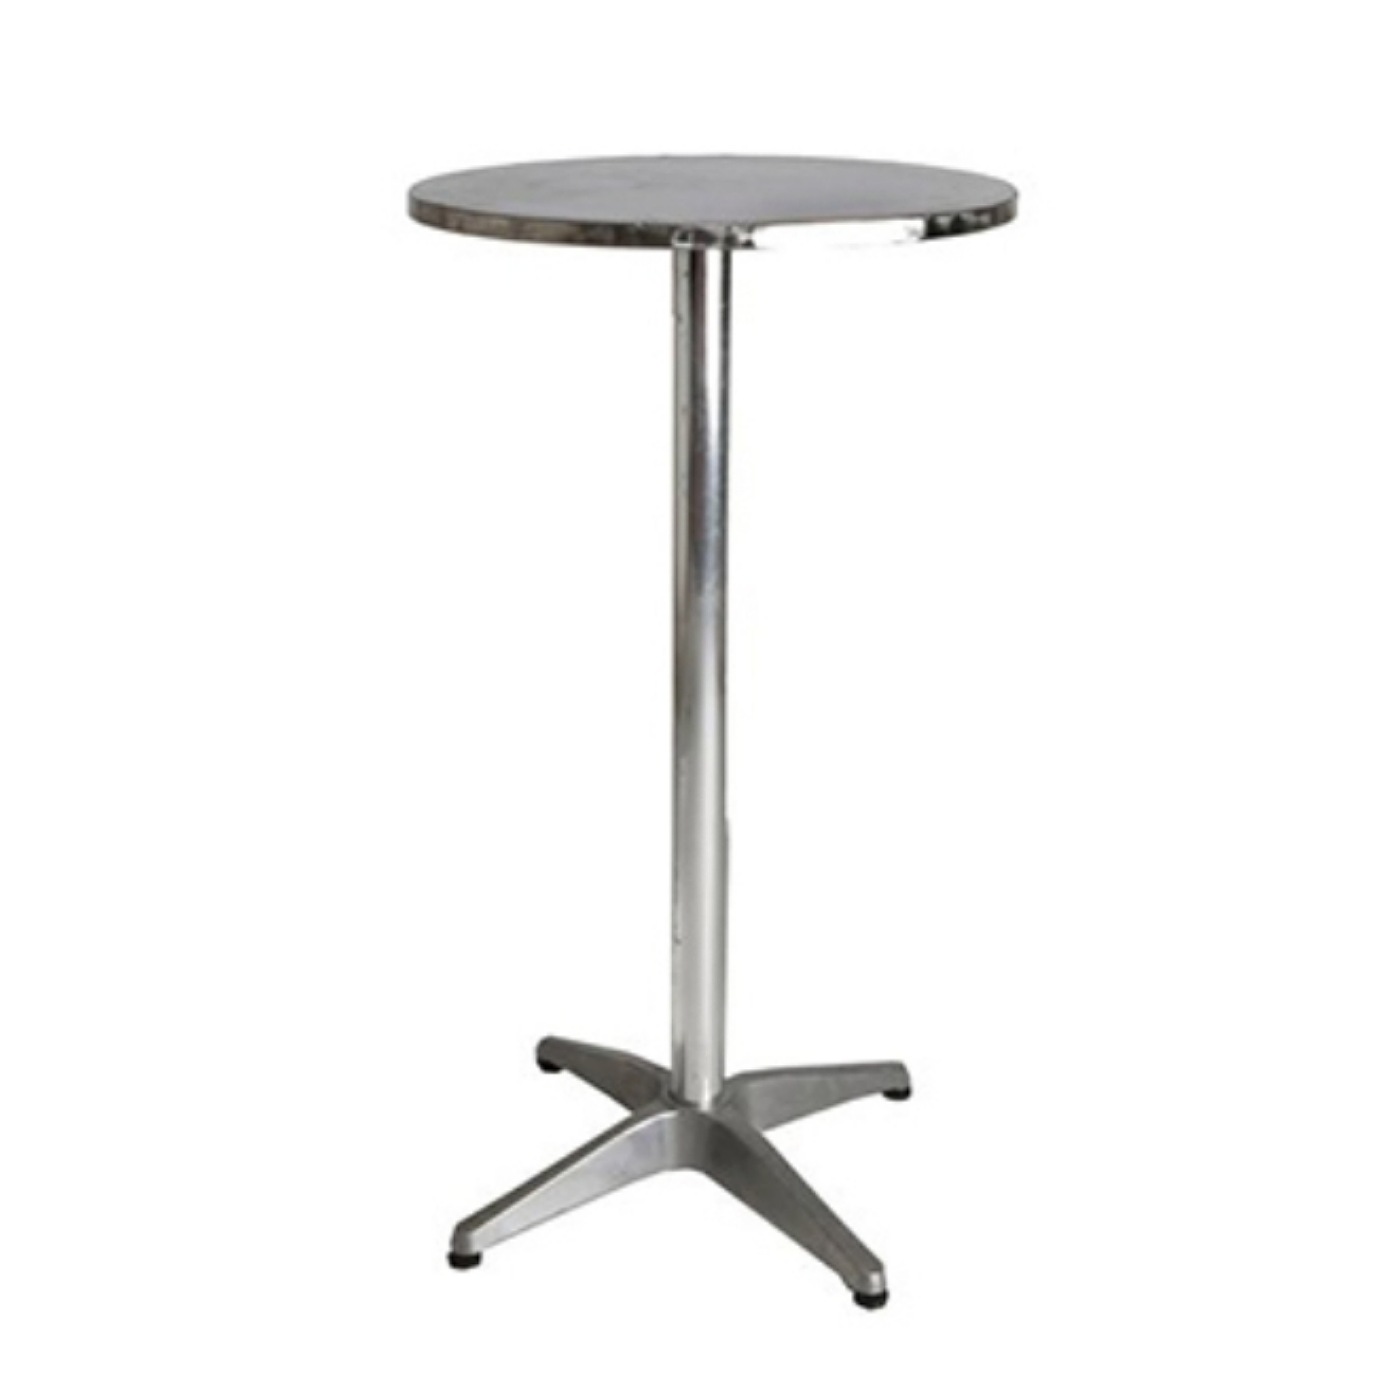 Chrome Cocktail Table With Round Chrome Top.